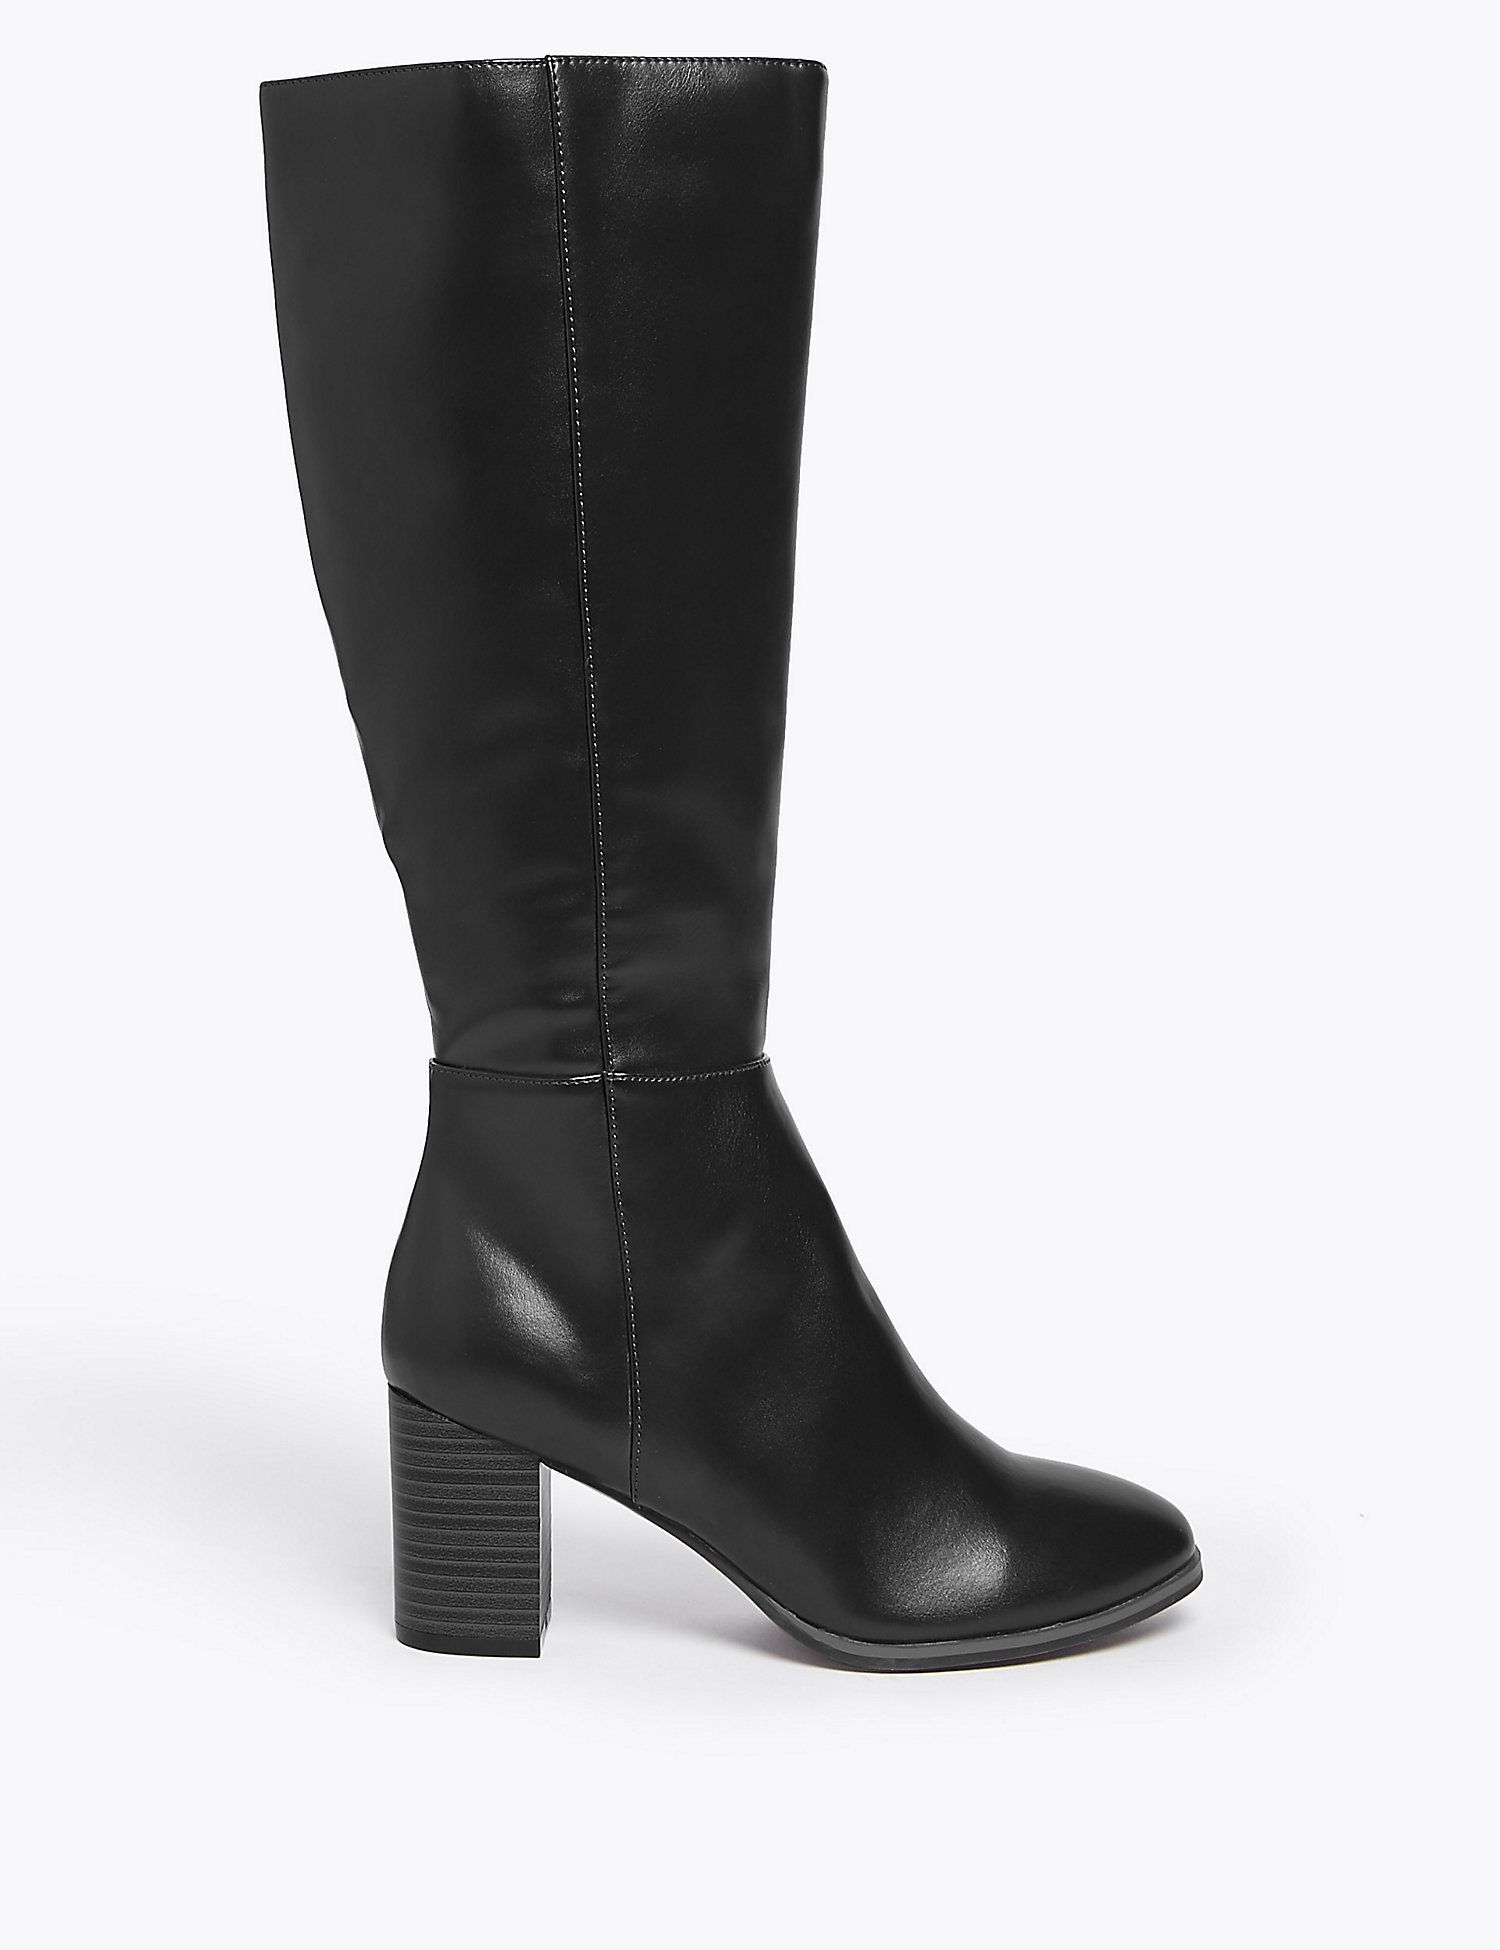 marks and spencer wedge boots